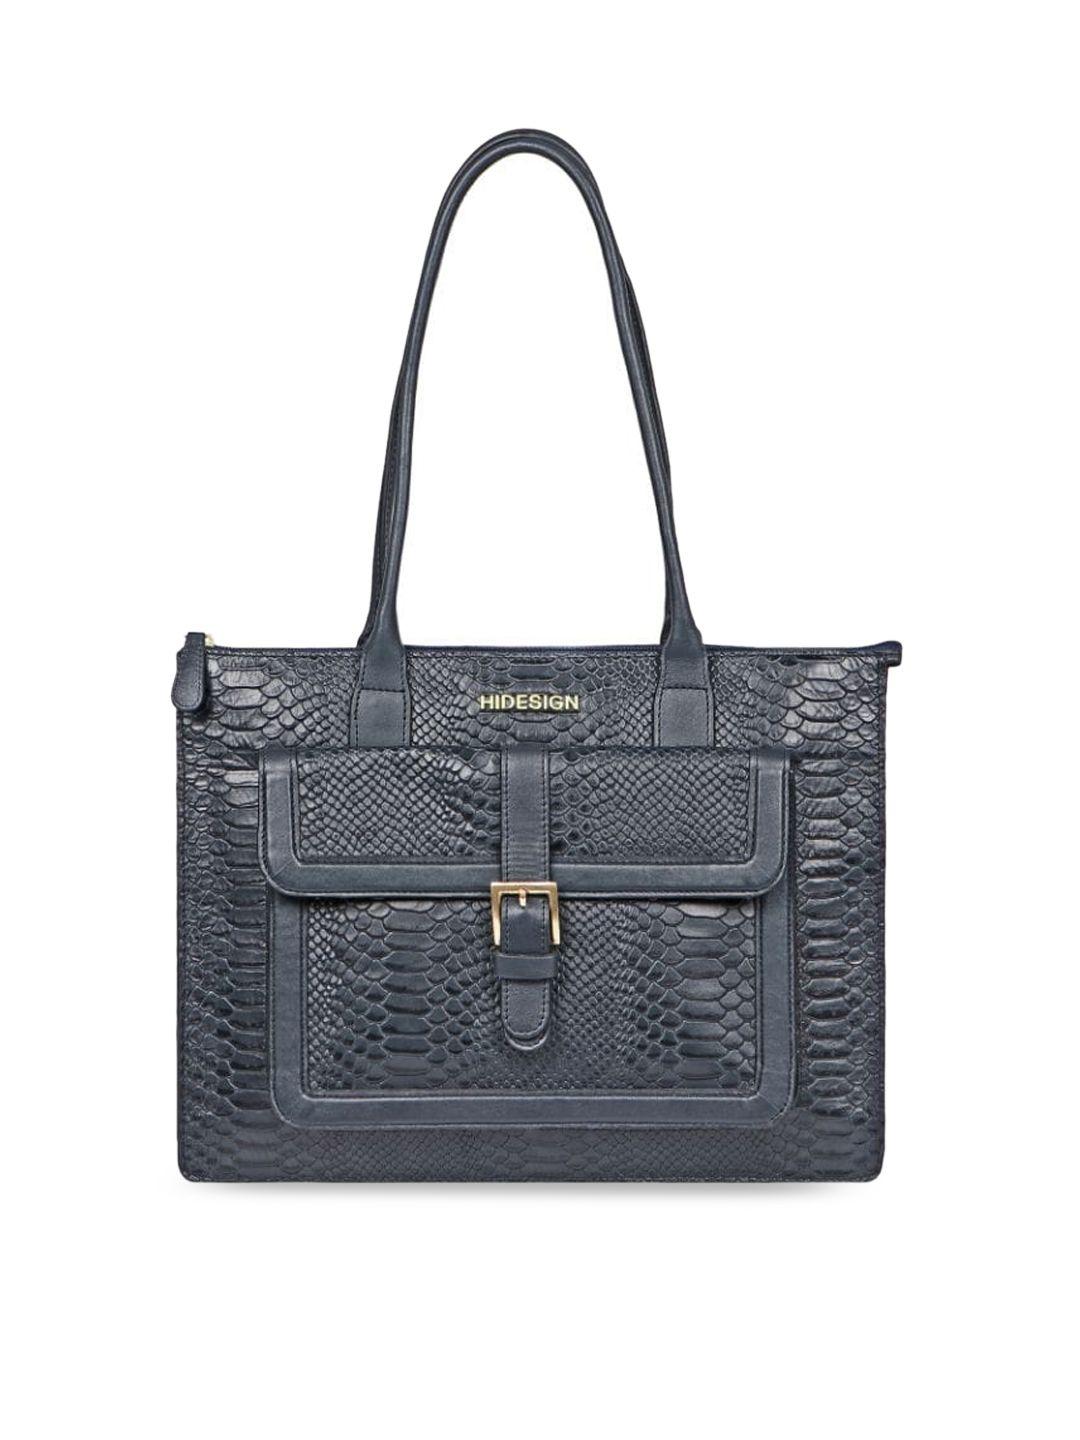 hidesign-women-textured-leather-shoulder-bag-with-buckle-detail